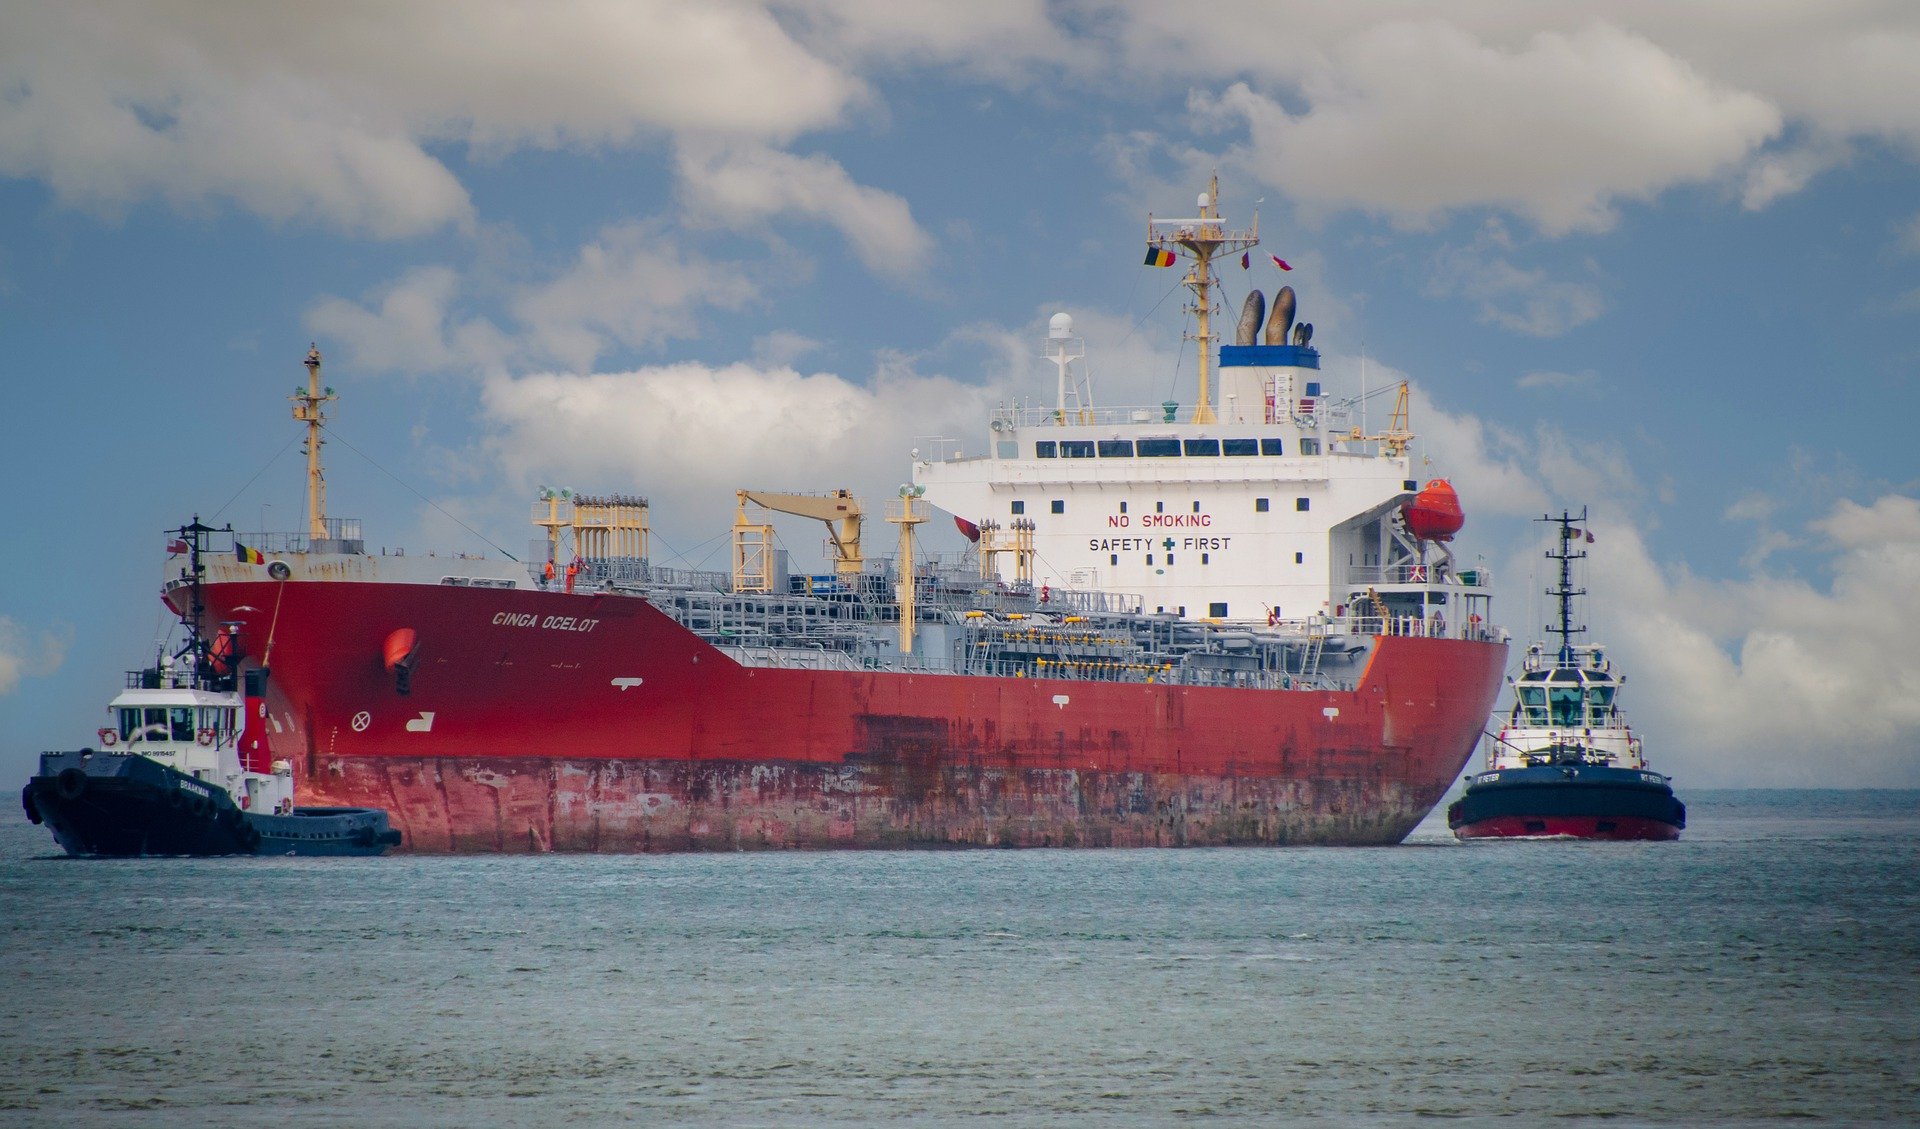 The expansion of DynaRep’s port towage network continues to Spain and Portugal